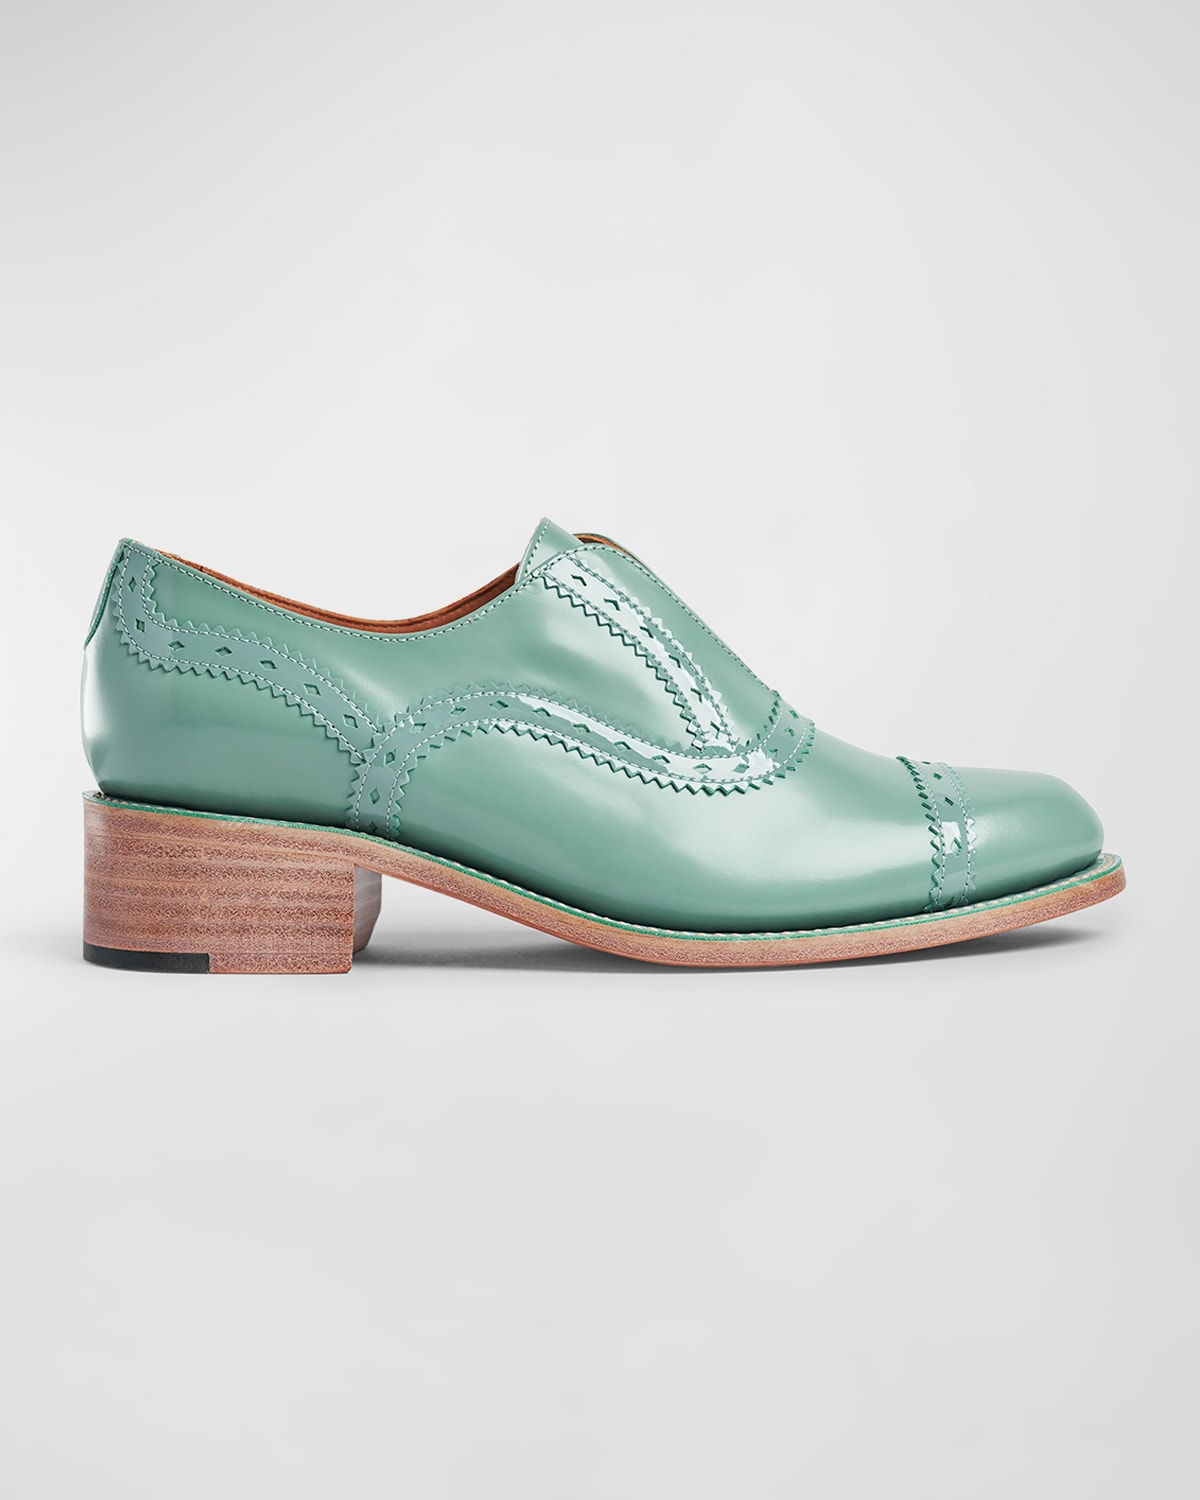 Ms. Arzner Laceless Brogue Leather Slip-On Shoes